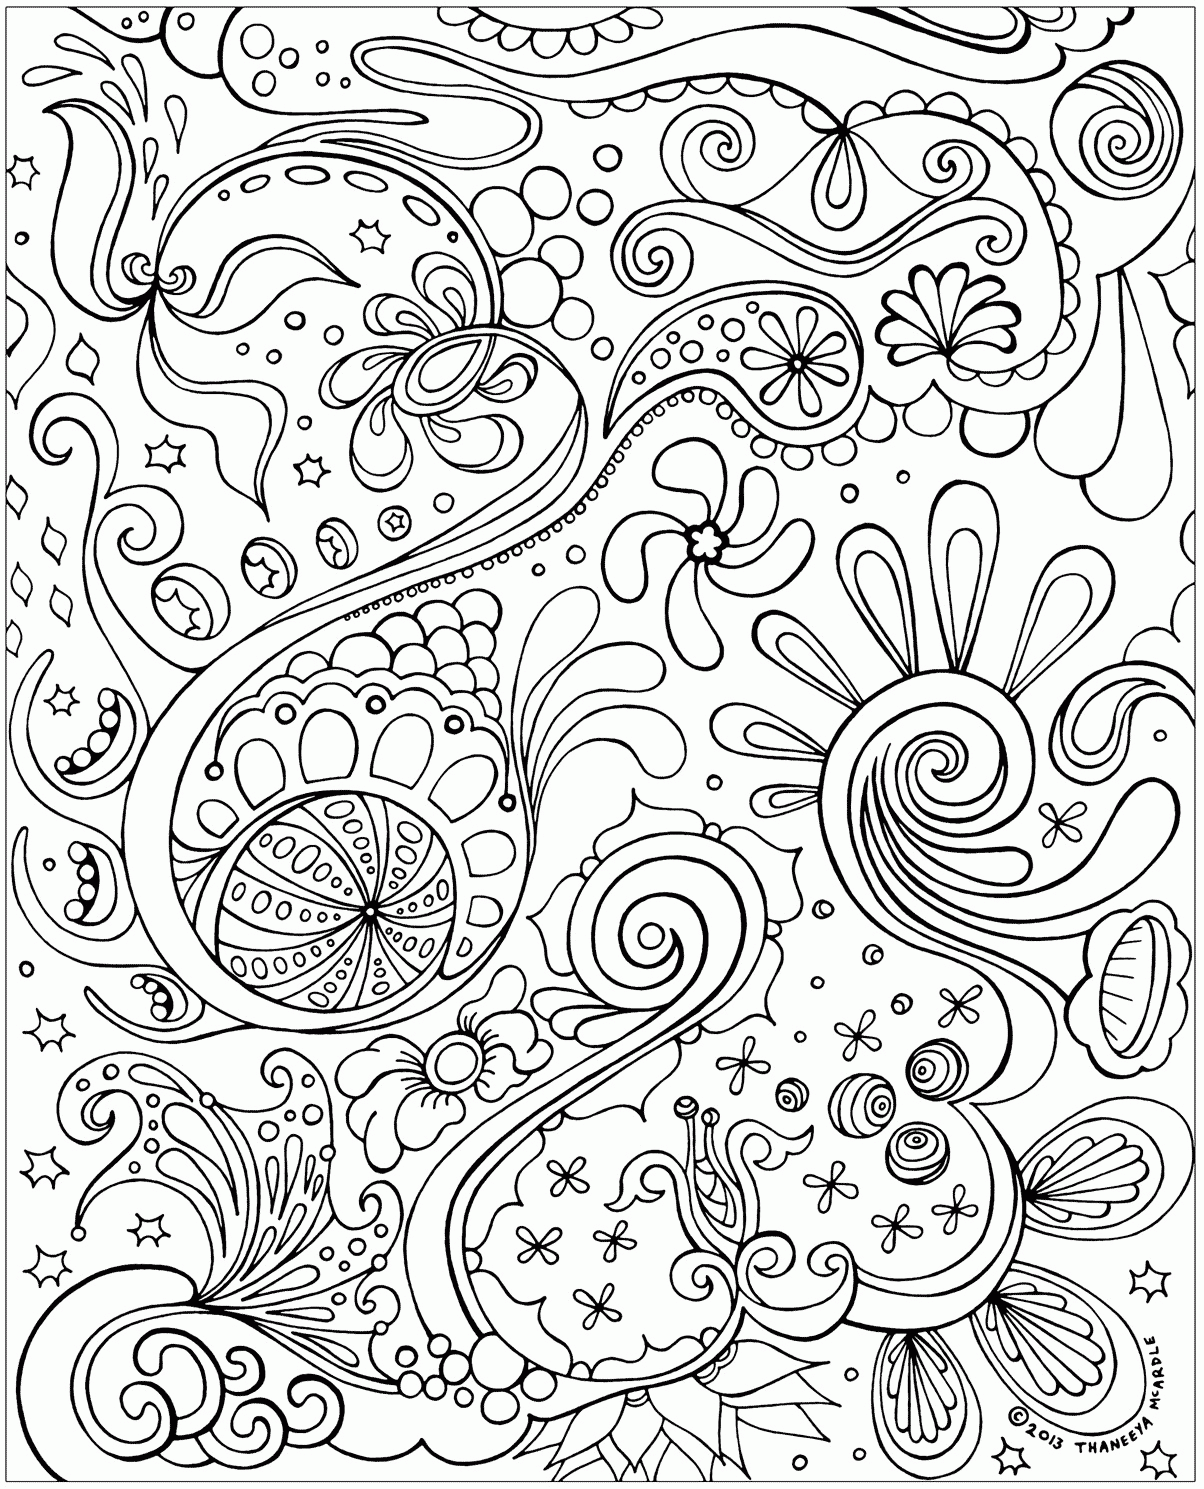 7 Best Images of Printable Adult Coloring Pages B - Adult Coloring ...